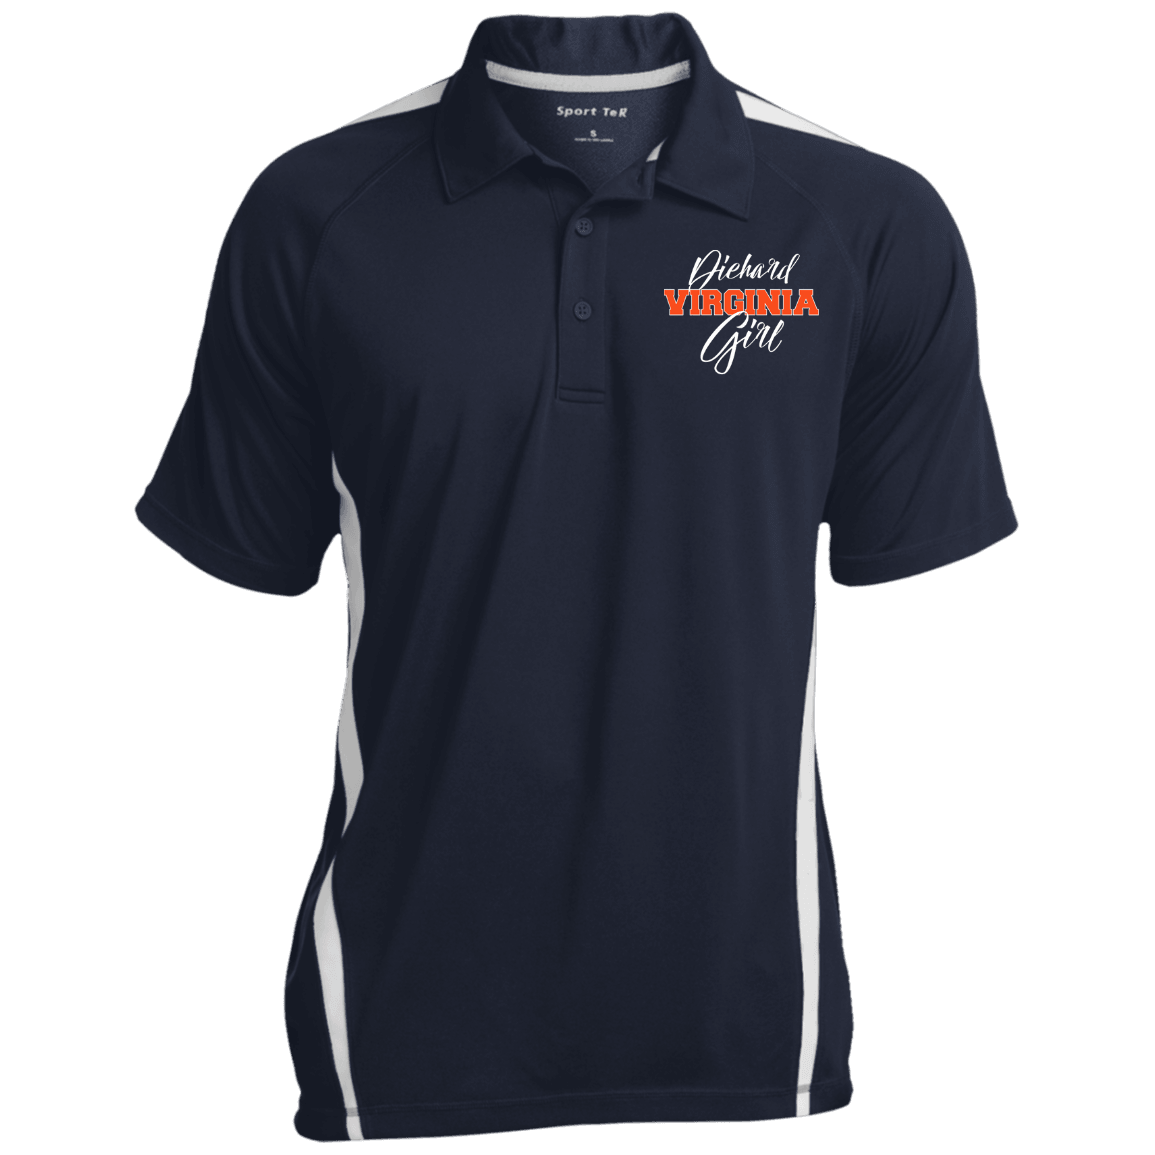 Designs by MyUtopia Shout Out:Diehard Virginia Girl Embroidered Sport-Tek Men's Colorblock 3-Button Polo - Navy Blue,True Navy/White / X-Small,Polo Shirts